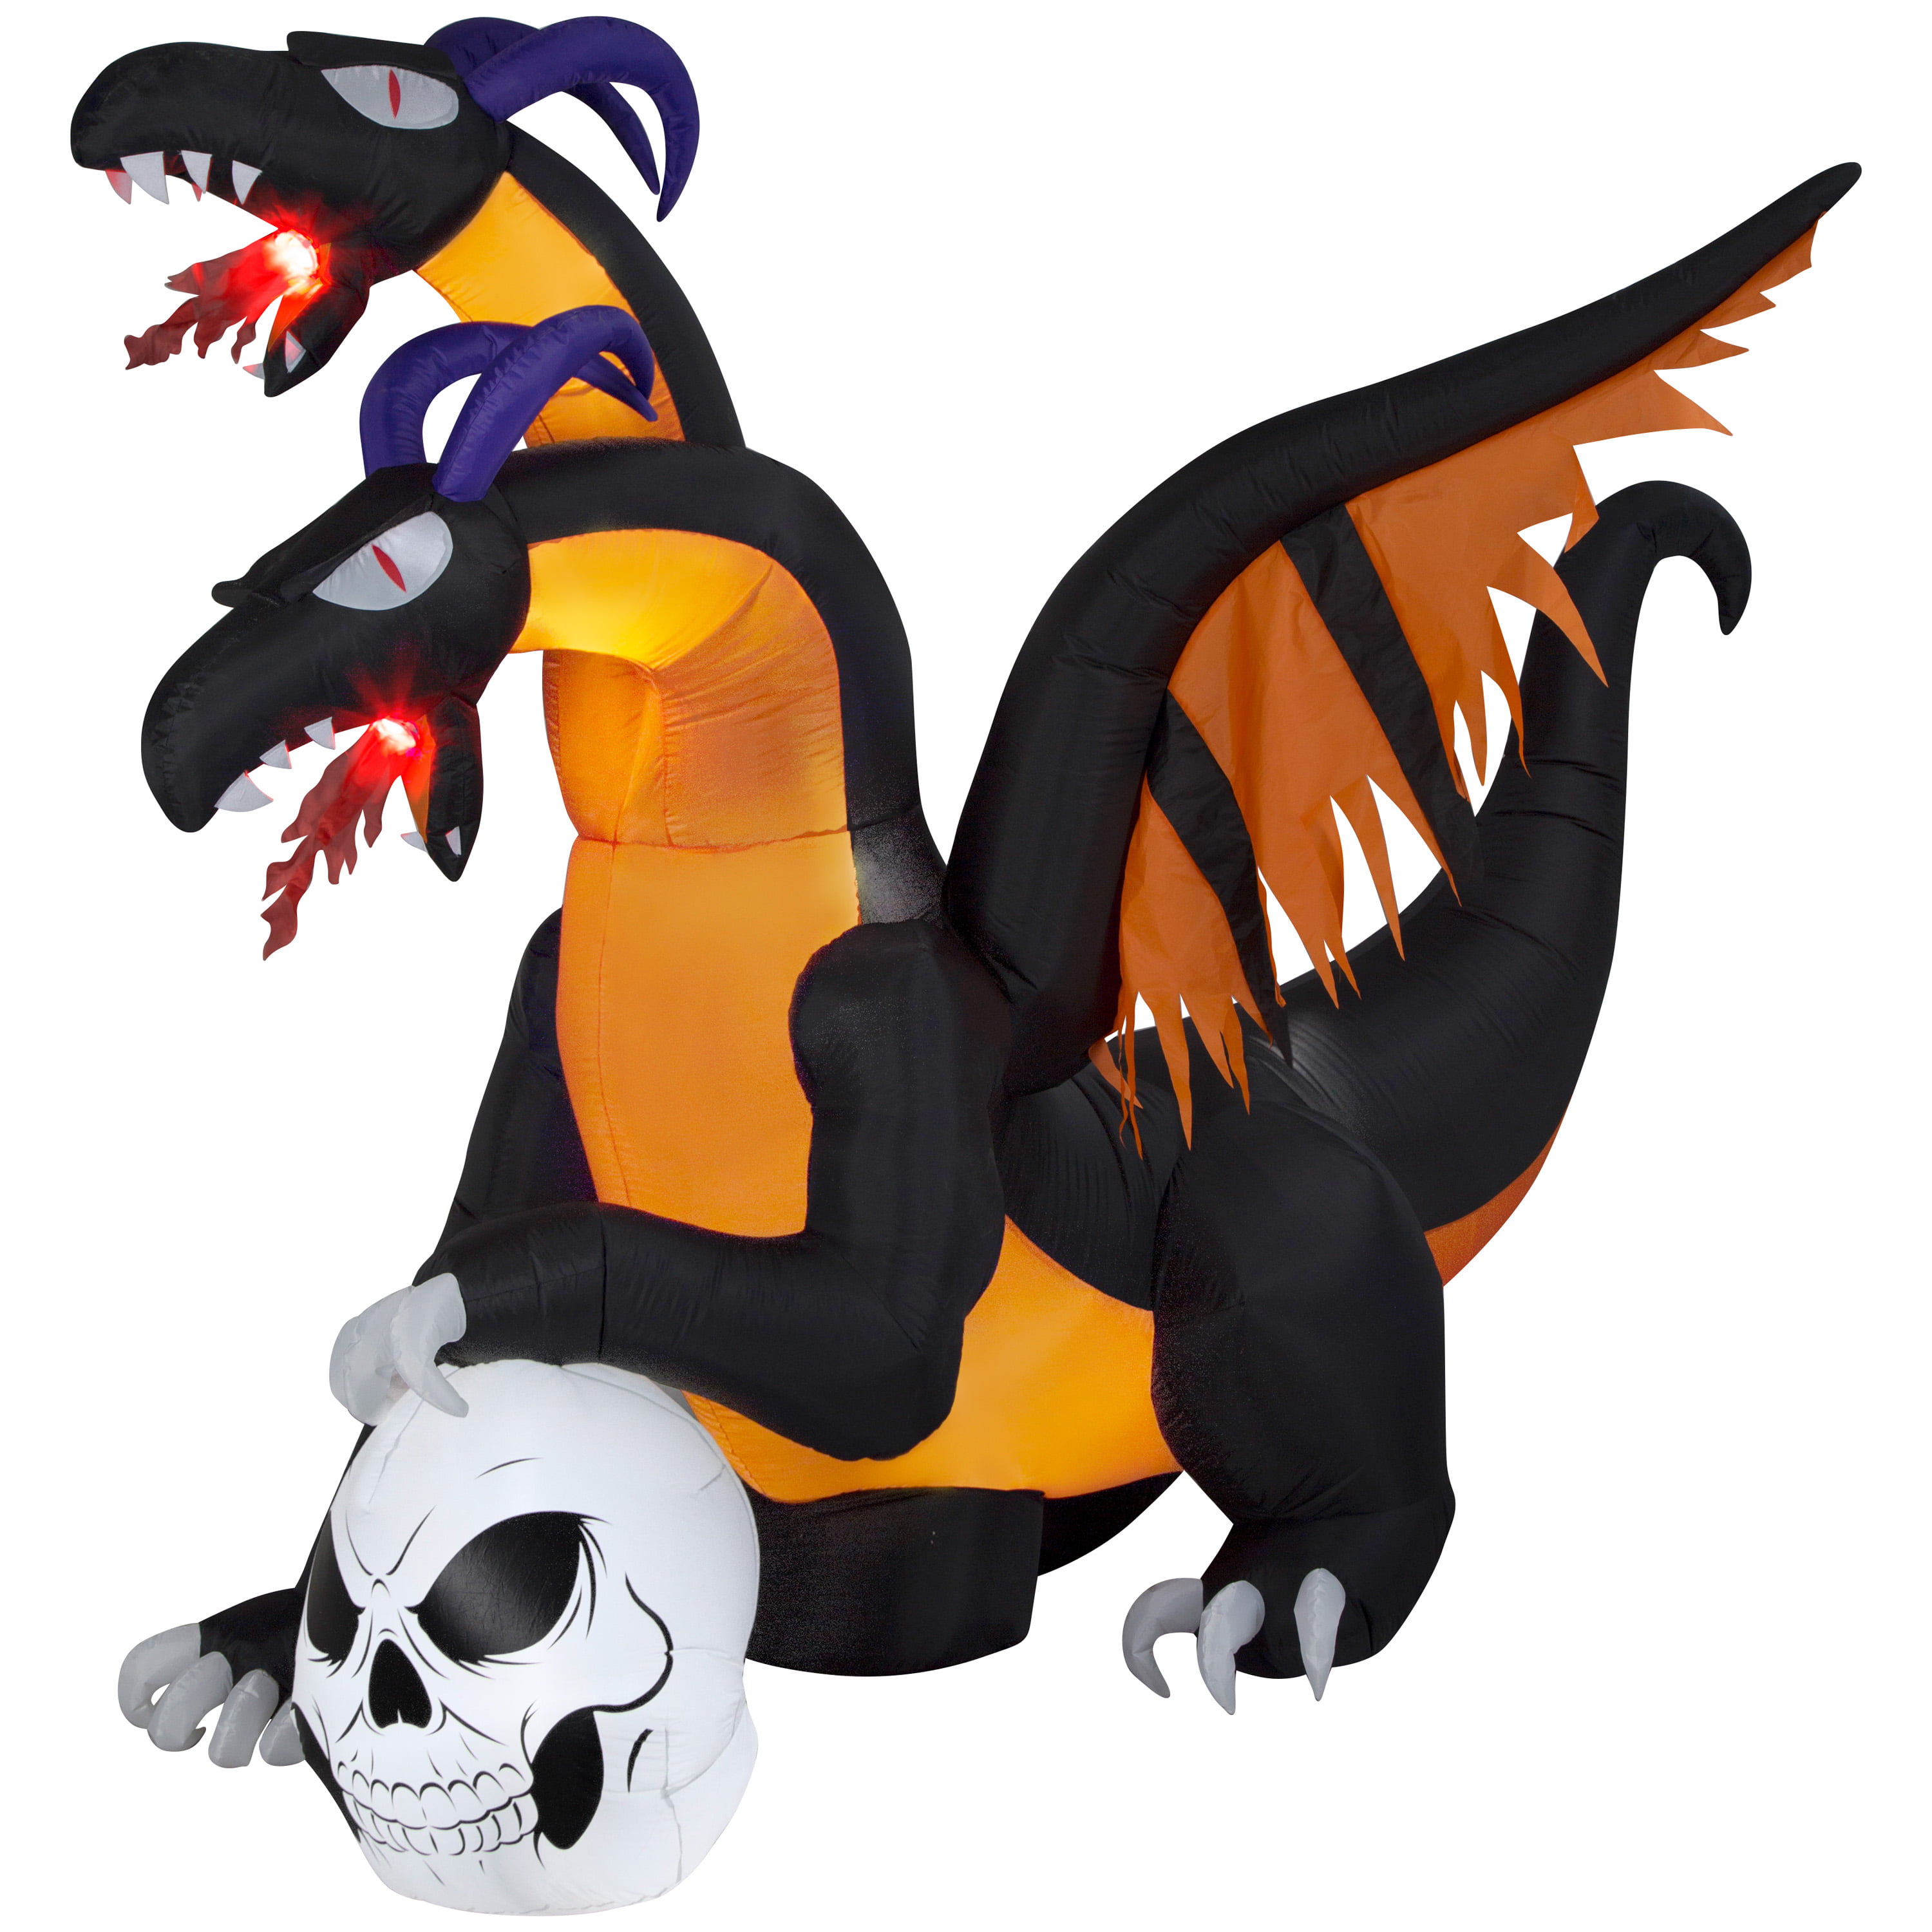 B.N.X 7 Ft Halloween Inflatable Two Head Dragon with LED Light for Indoor Outdoor Decoration 